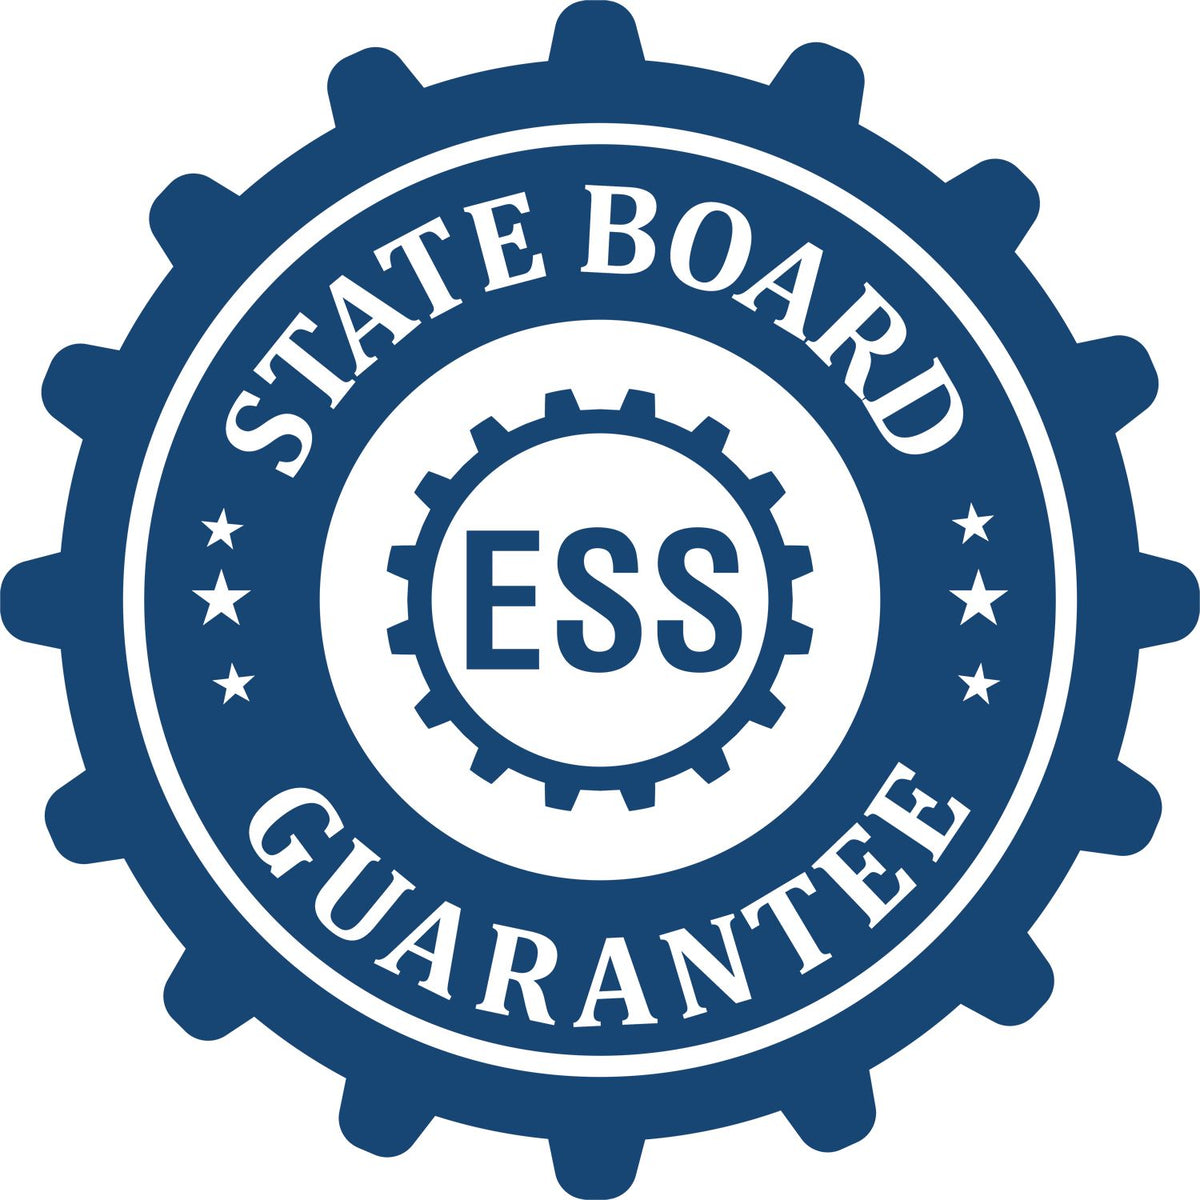 An emblem in a gear shape illustrating a state board guarantee for the Gift Connecticut Landscape Architect Seal